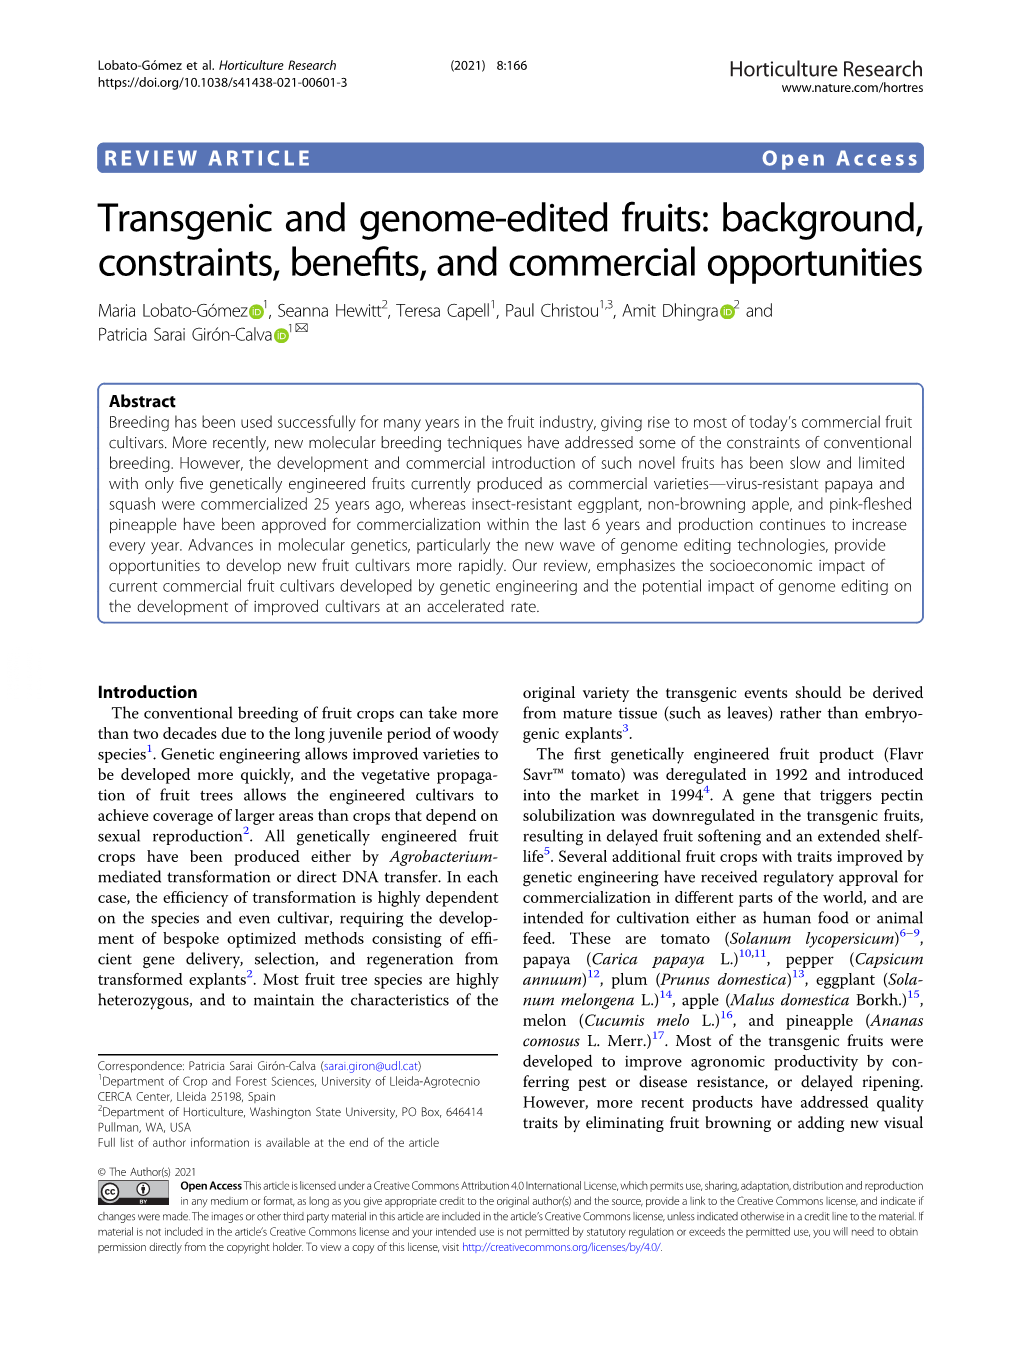 Transgenic and Genome-Edited Fruits